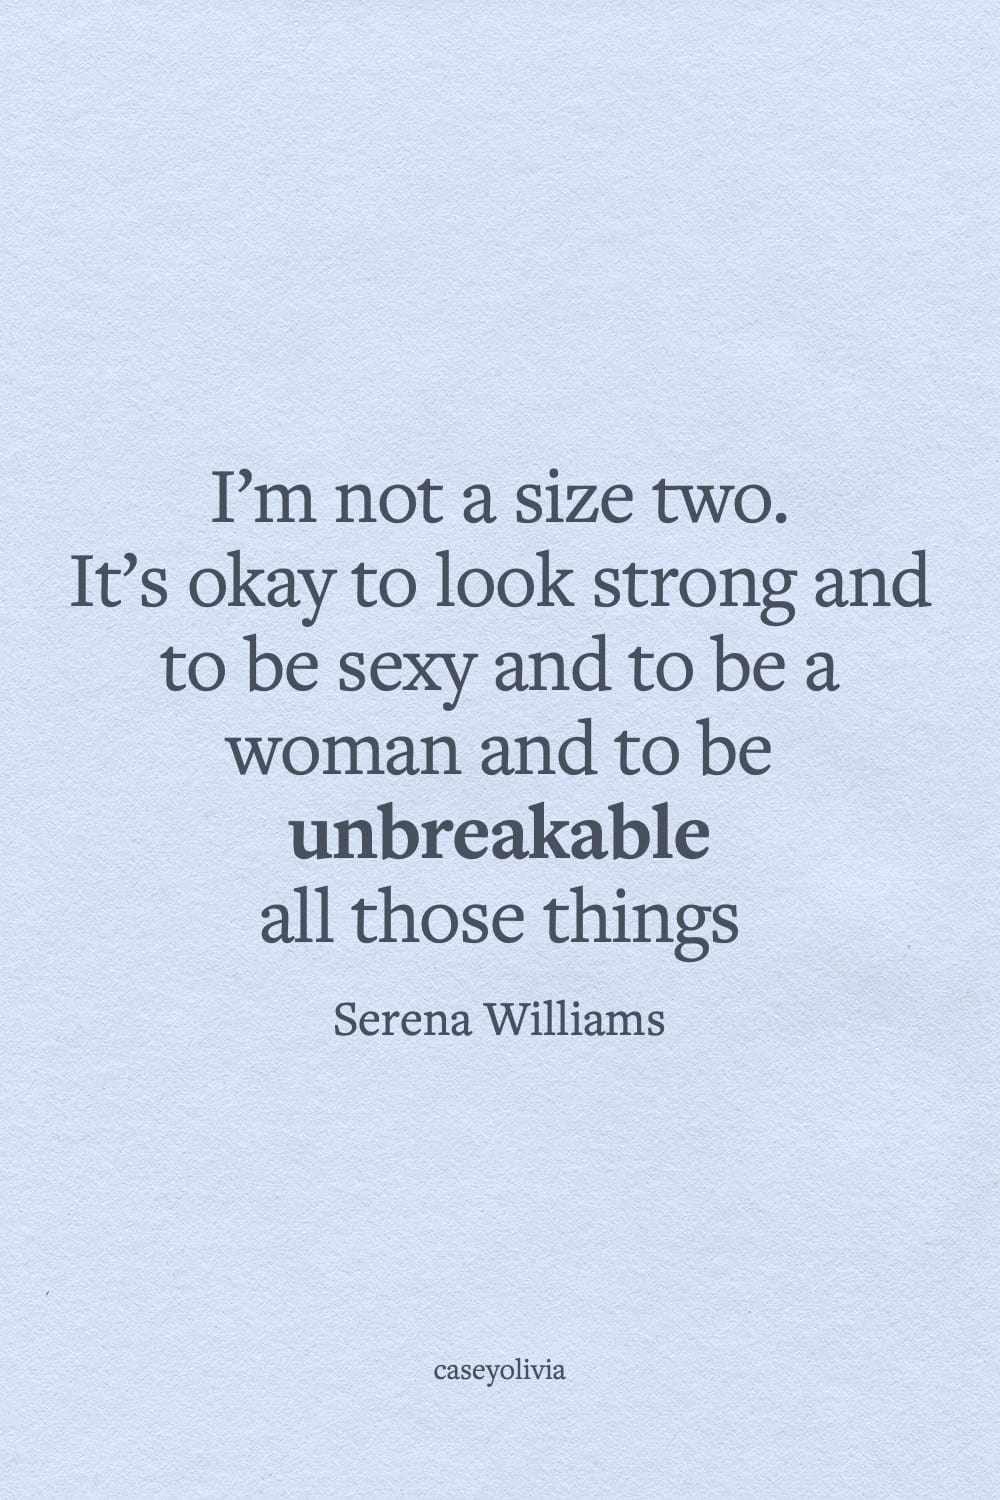 serena williams unbreakable saying for self confidence